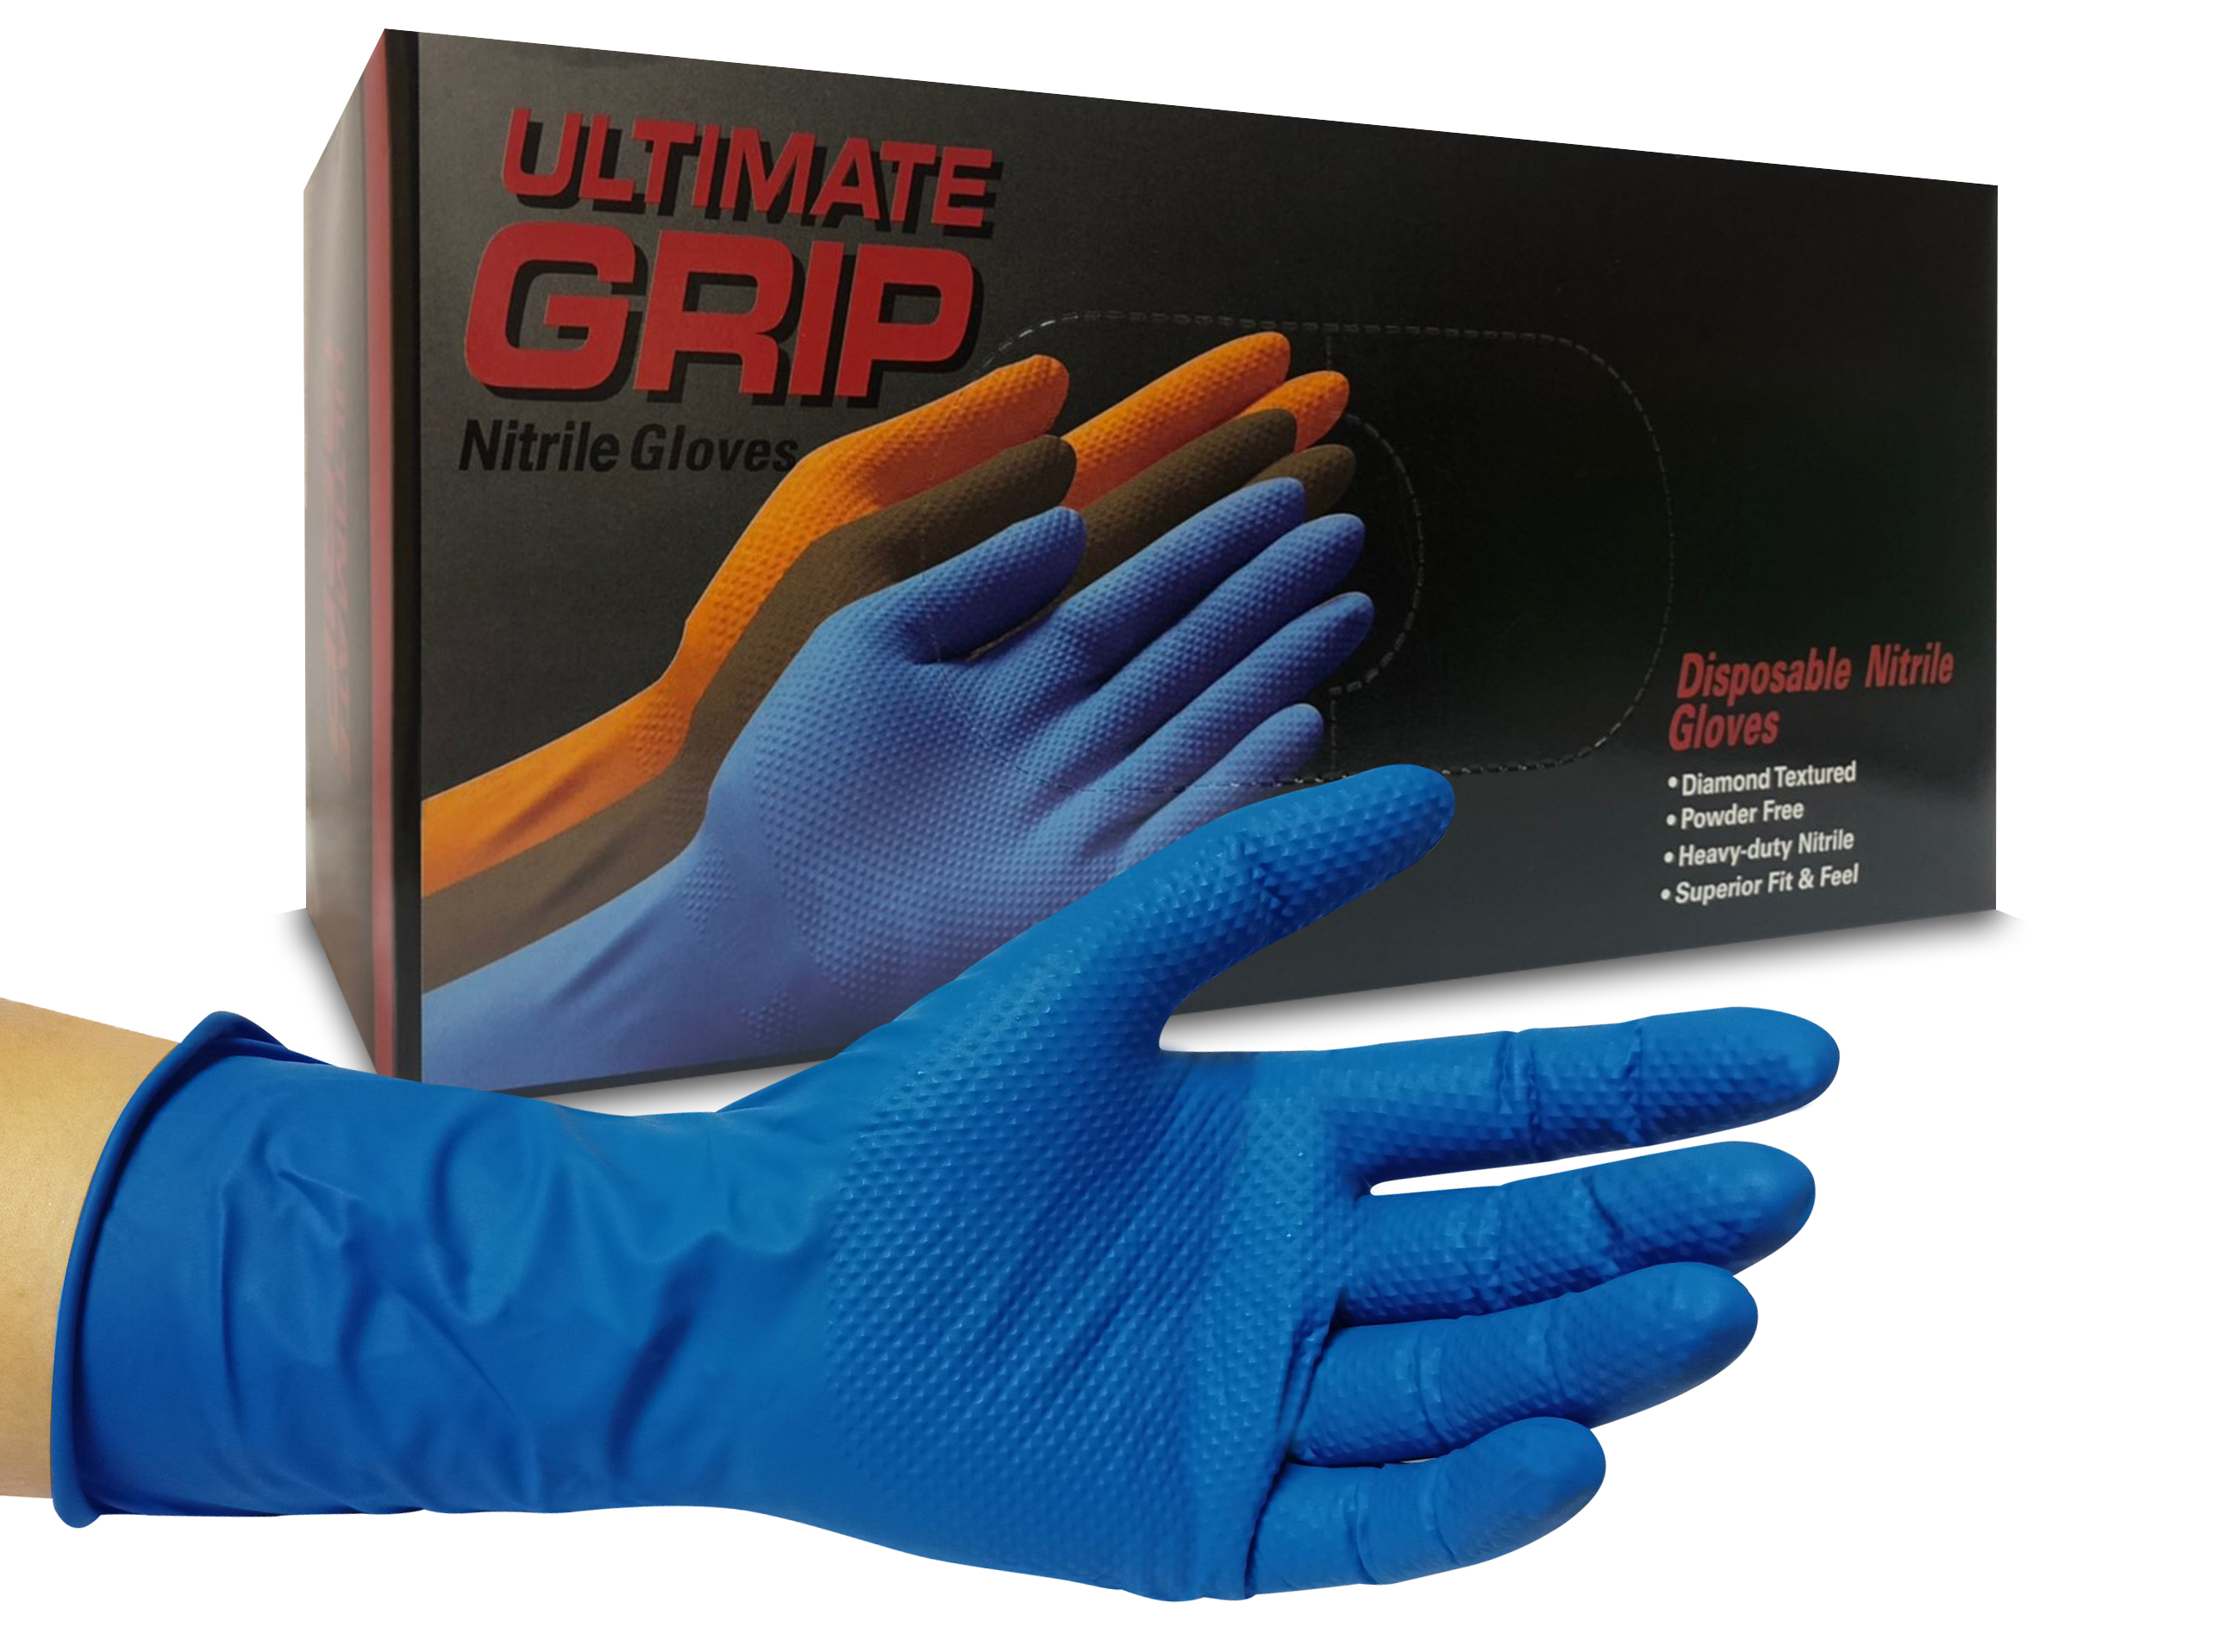 285mm 50 per Pack Size XXXL Micro Diamond Textured 9 mil Royal Blue Commercial Powder Free Disposable Nitrile Gloves 